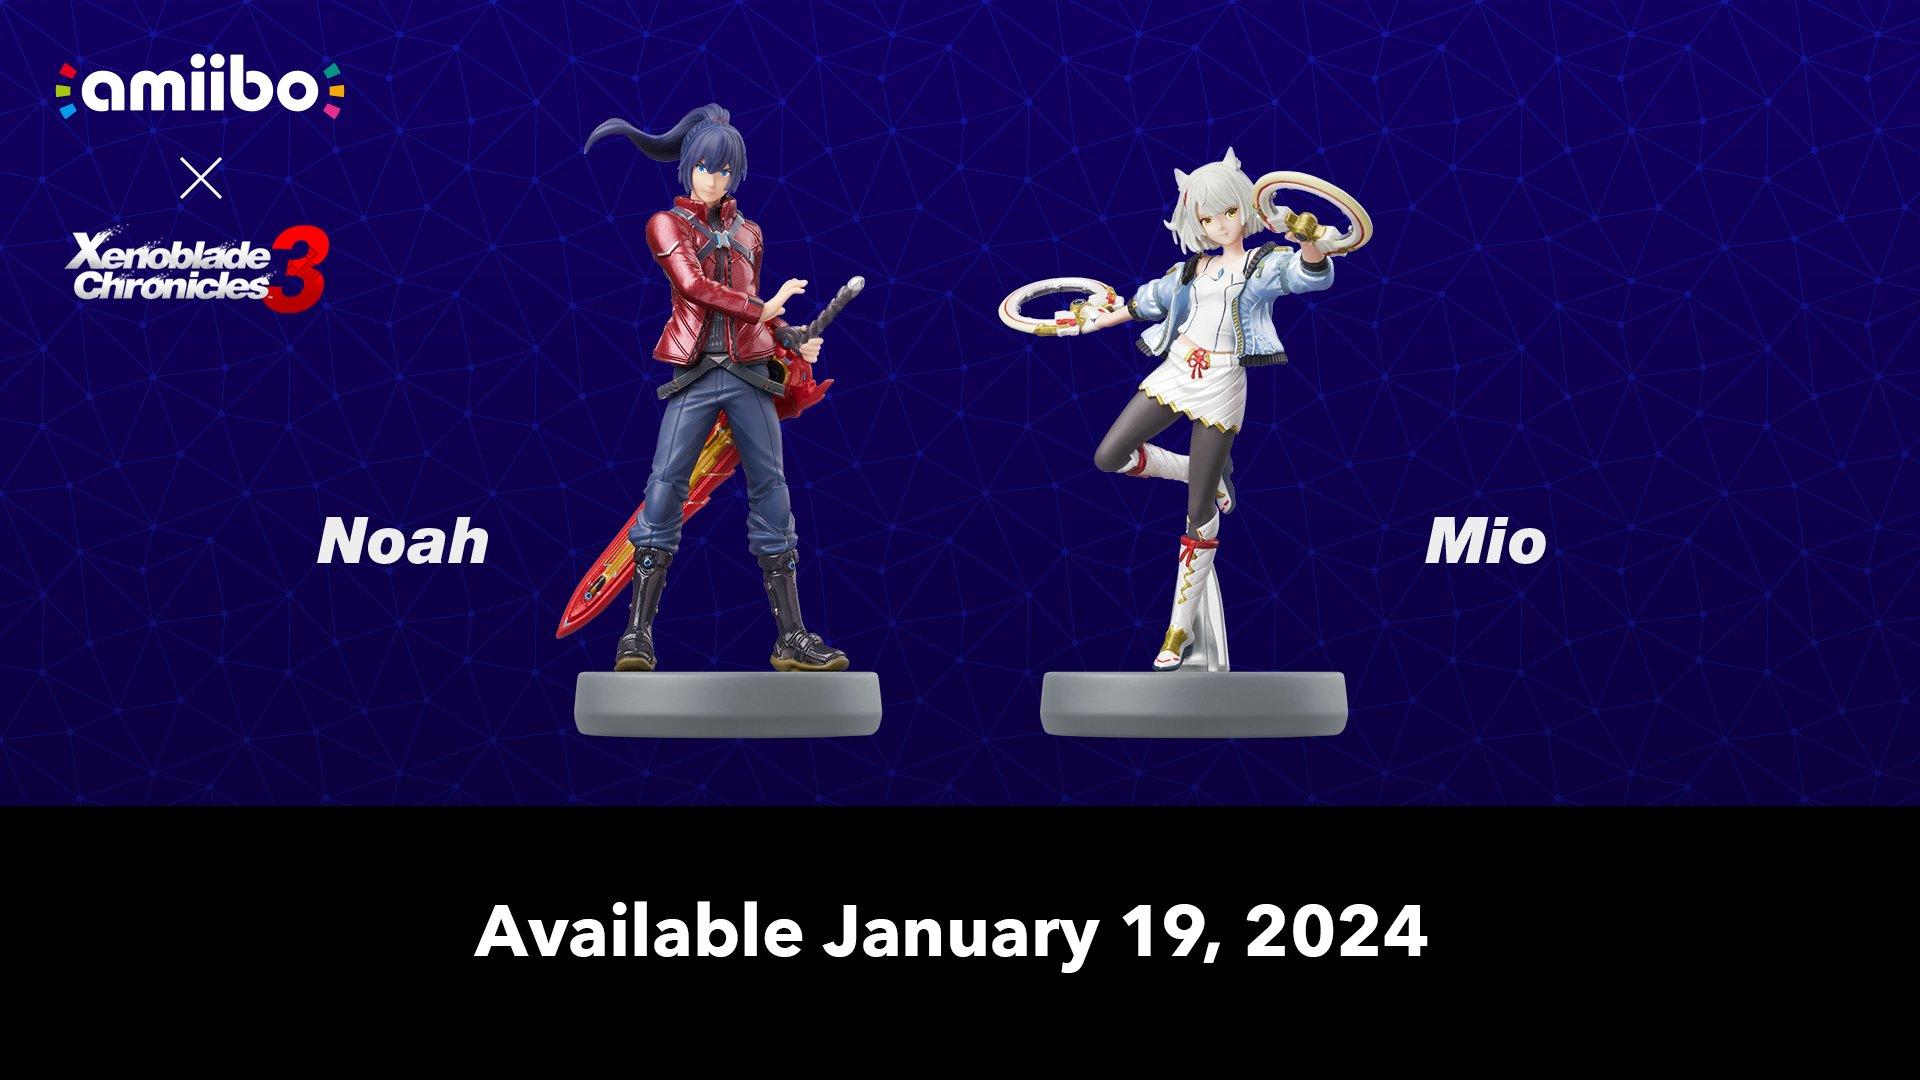 Super Smash Bros. Ultimate update adds support for the Sora amiibo